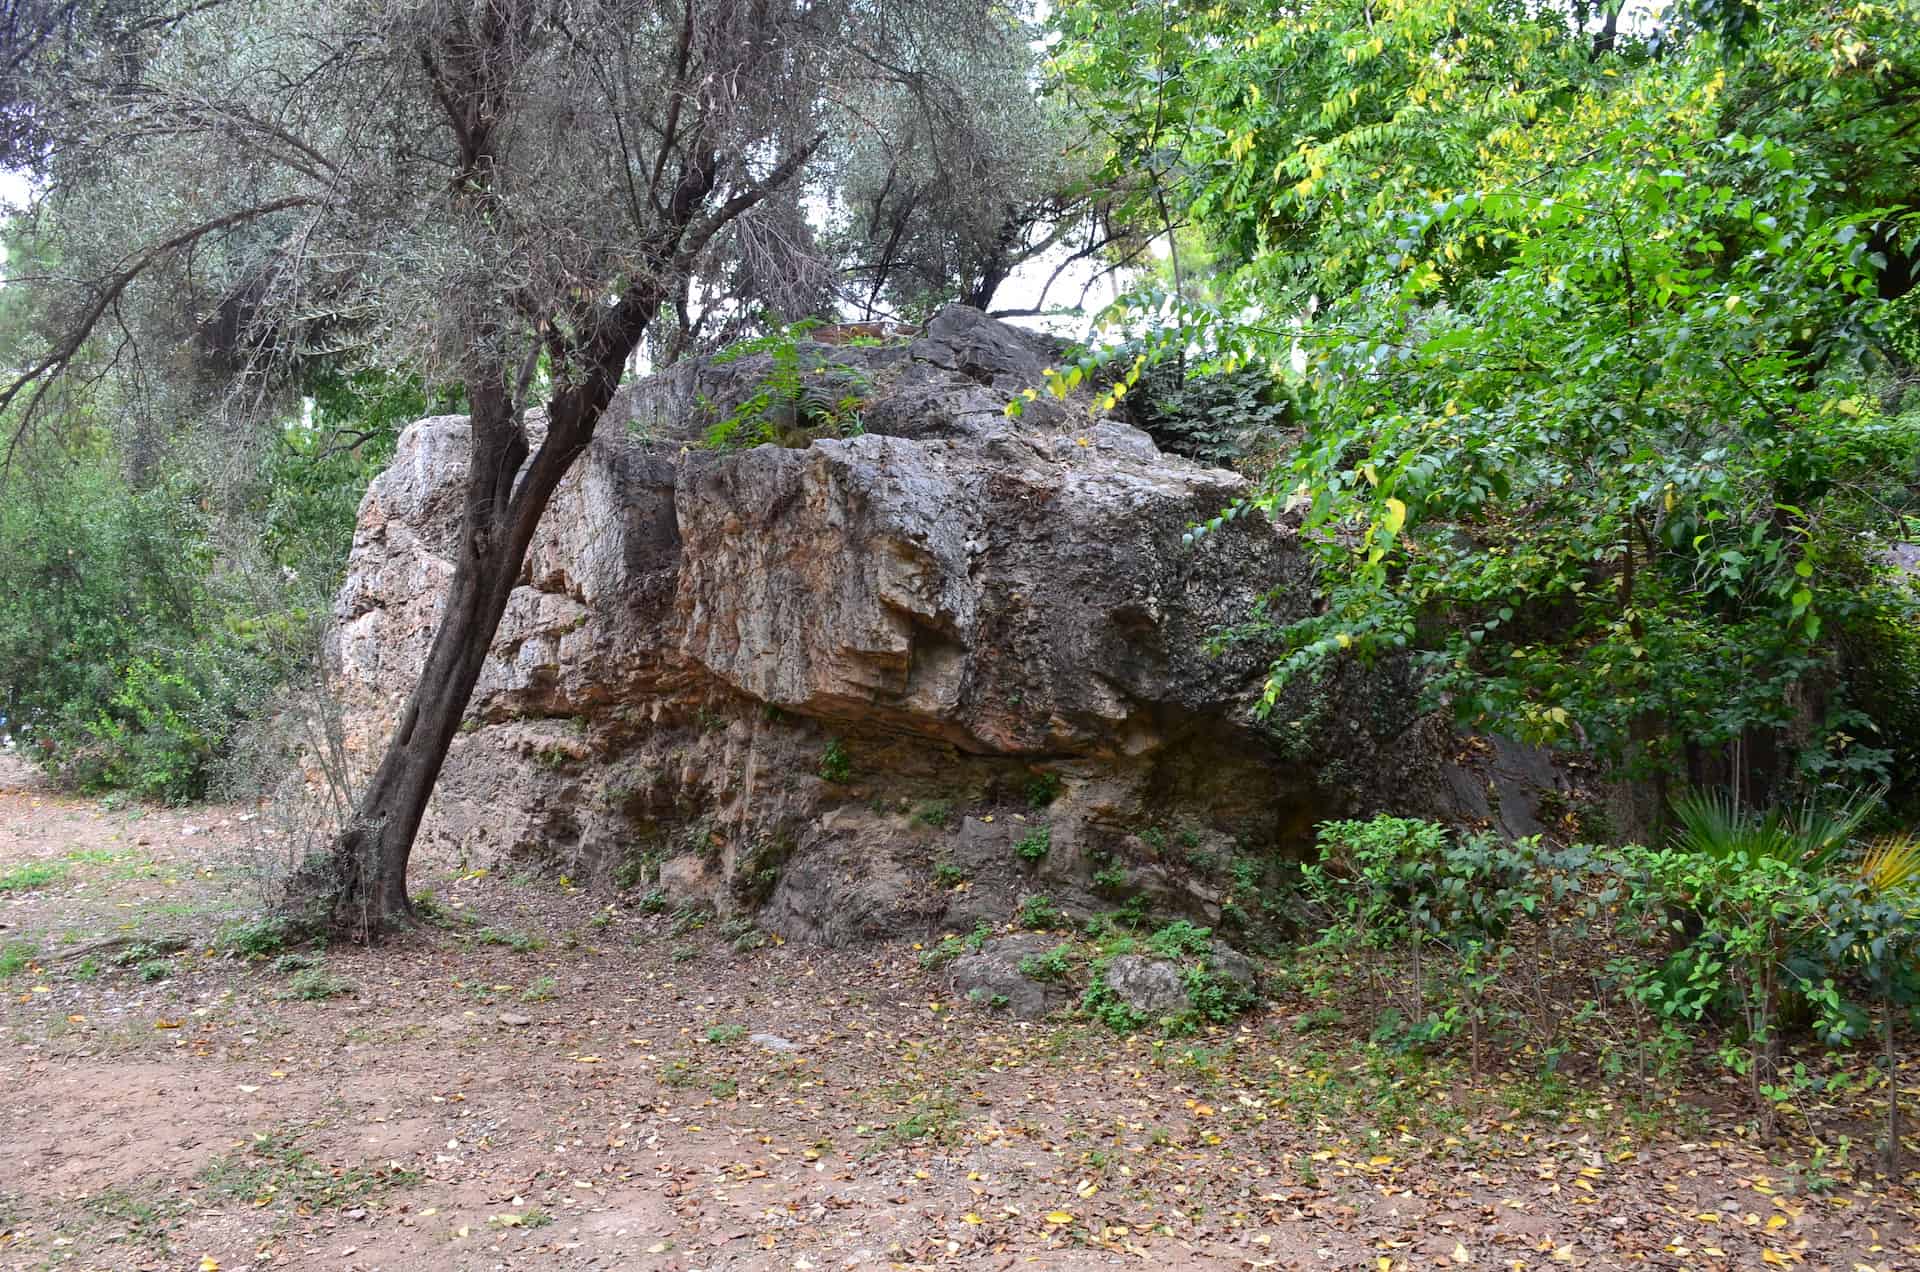 Queen Amalia's Rock at the National Garden in Athens, Greece